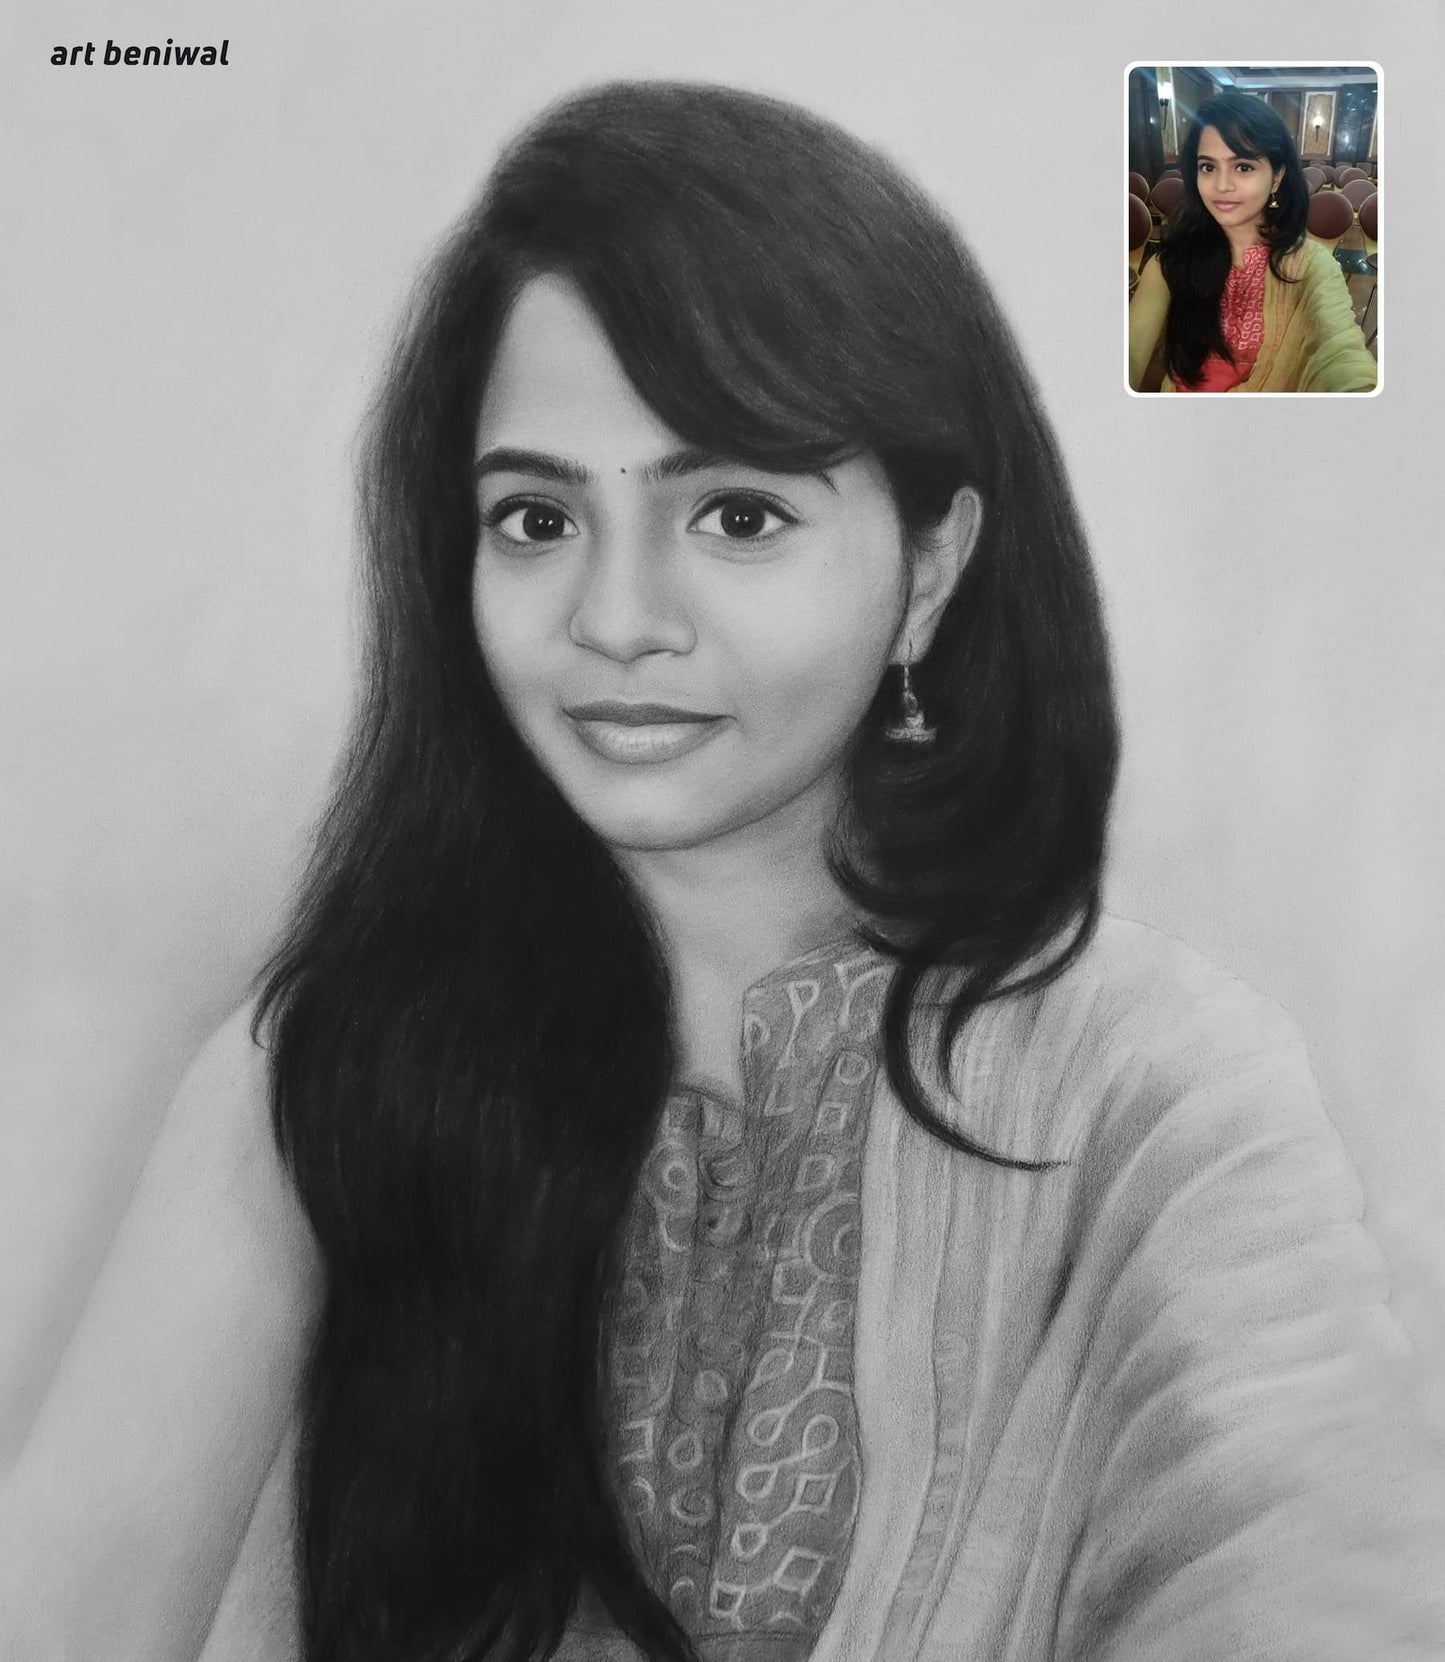 Custom Photo Drawing Gift - A Special Birthday Gift for Her | Order Online